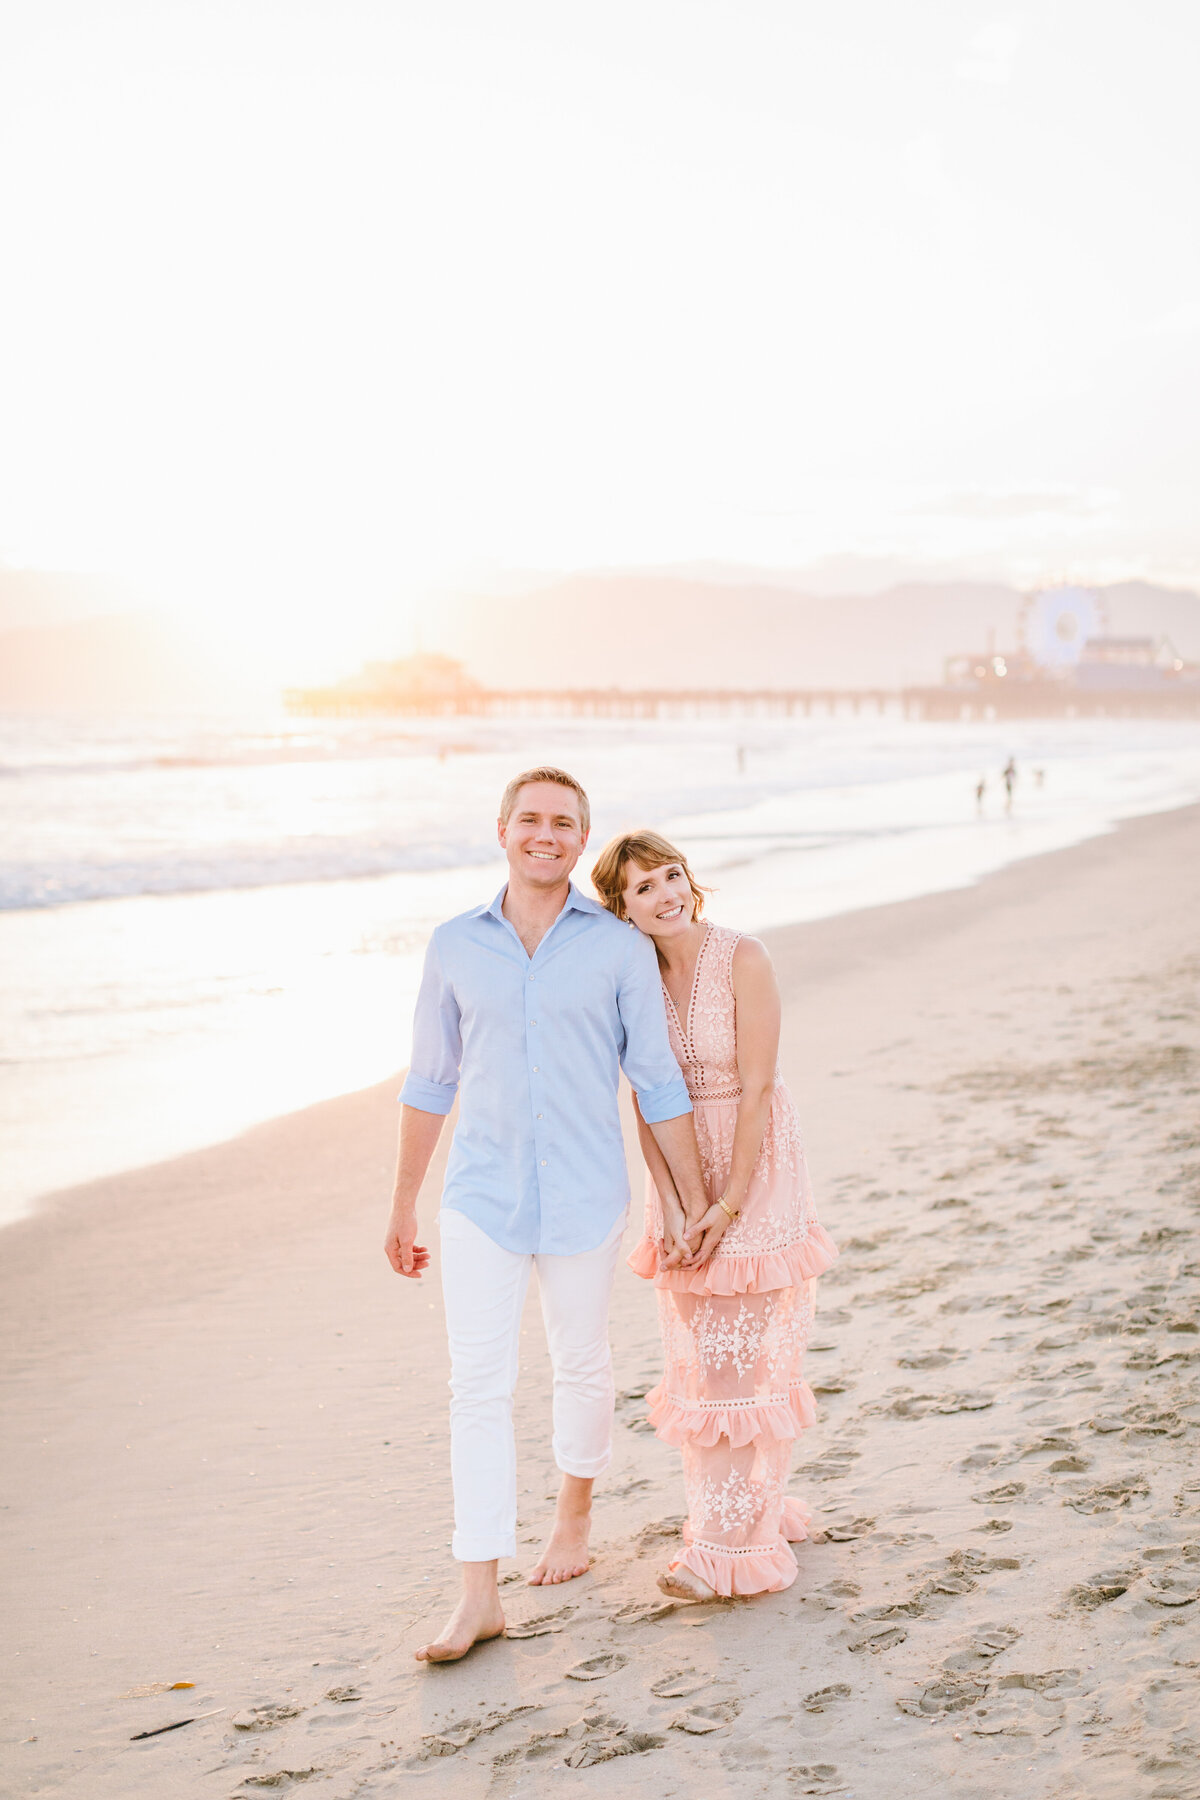 Best California and Texas Engagement Photographer-Jodee Debes Photography-217